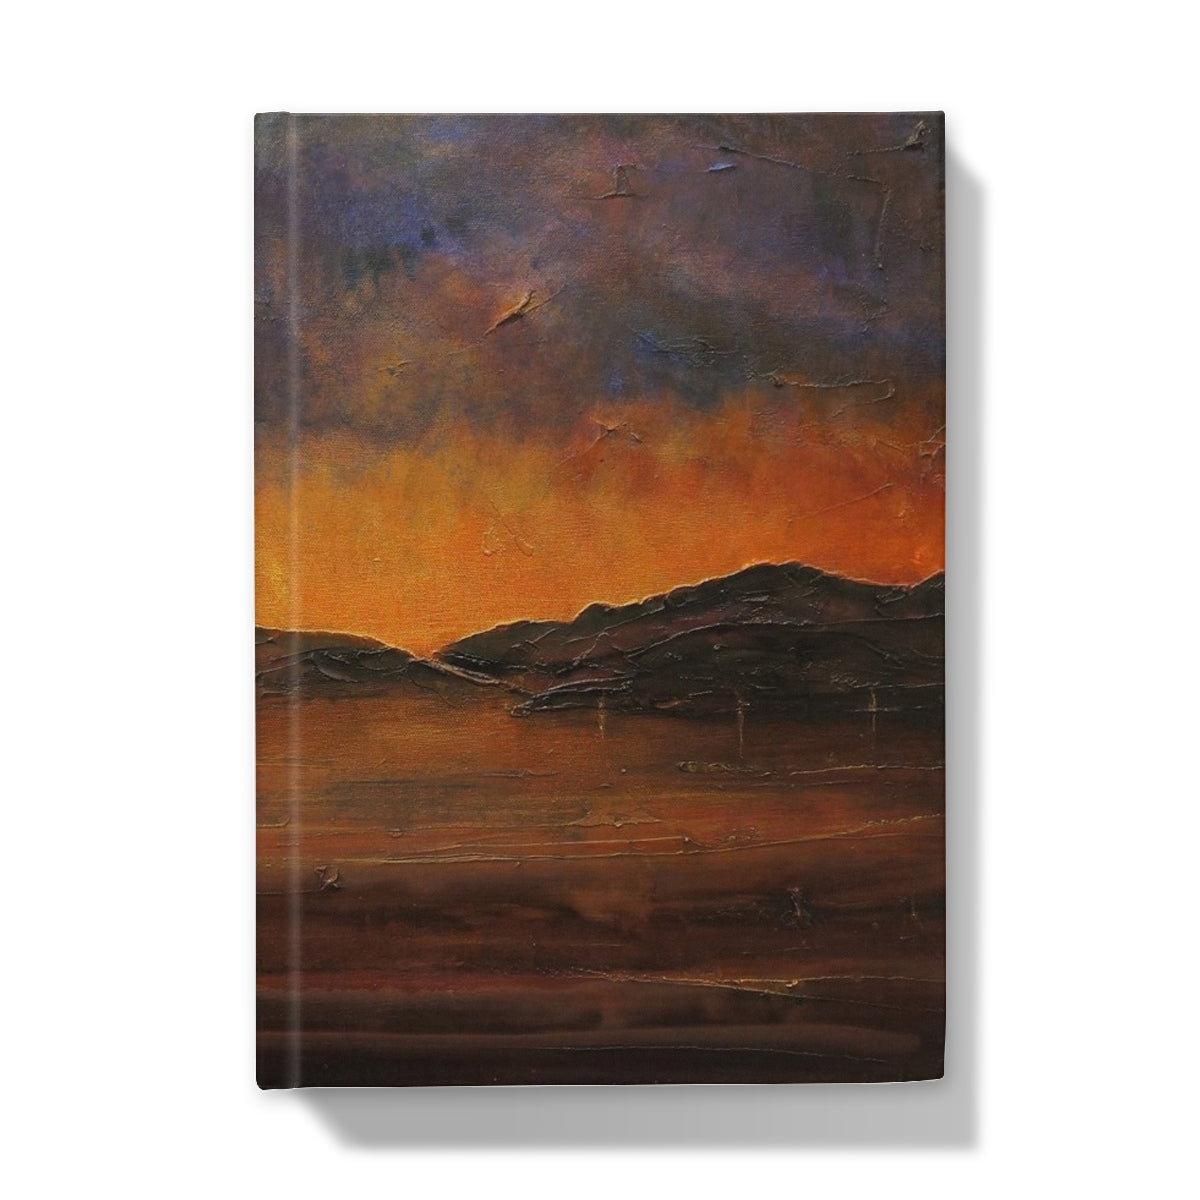 A Brooding Clyde Dusk Art Gifts Hardback Journal-Journals & Notebooks-River Clyde Art Gallery-A4-Plain-Paintings, Prints, Homeware, Art Gifts From Scotland By Scottish Artist Kevin Hunter